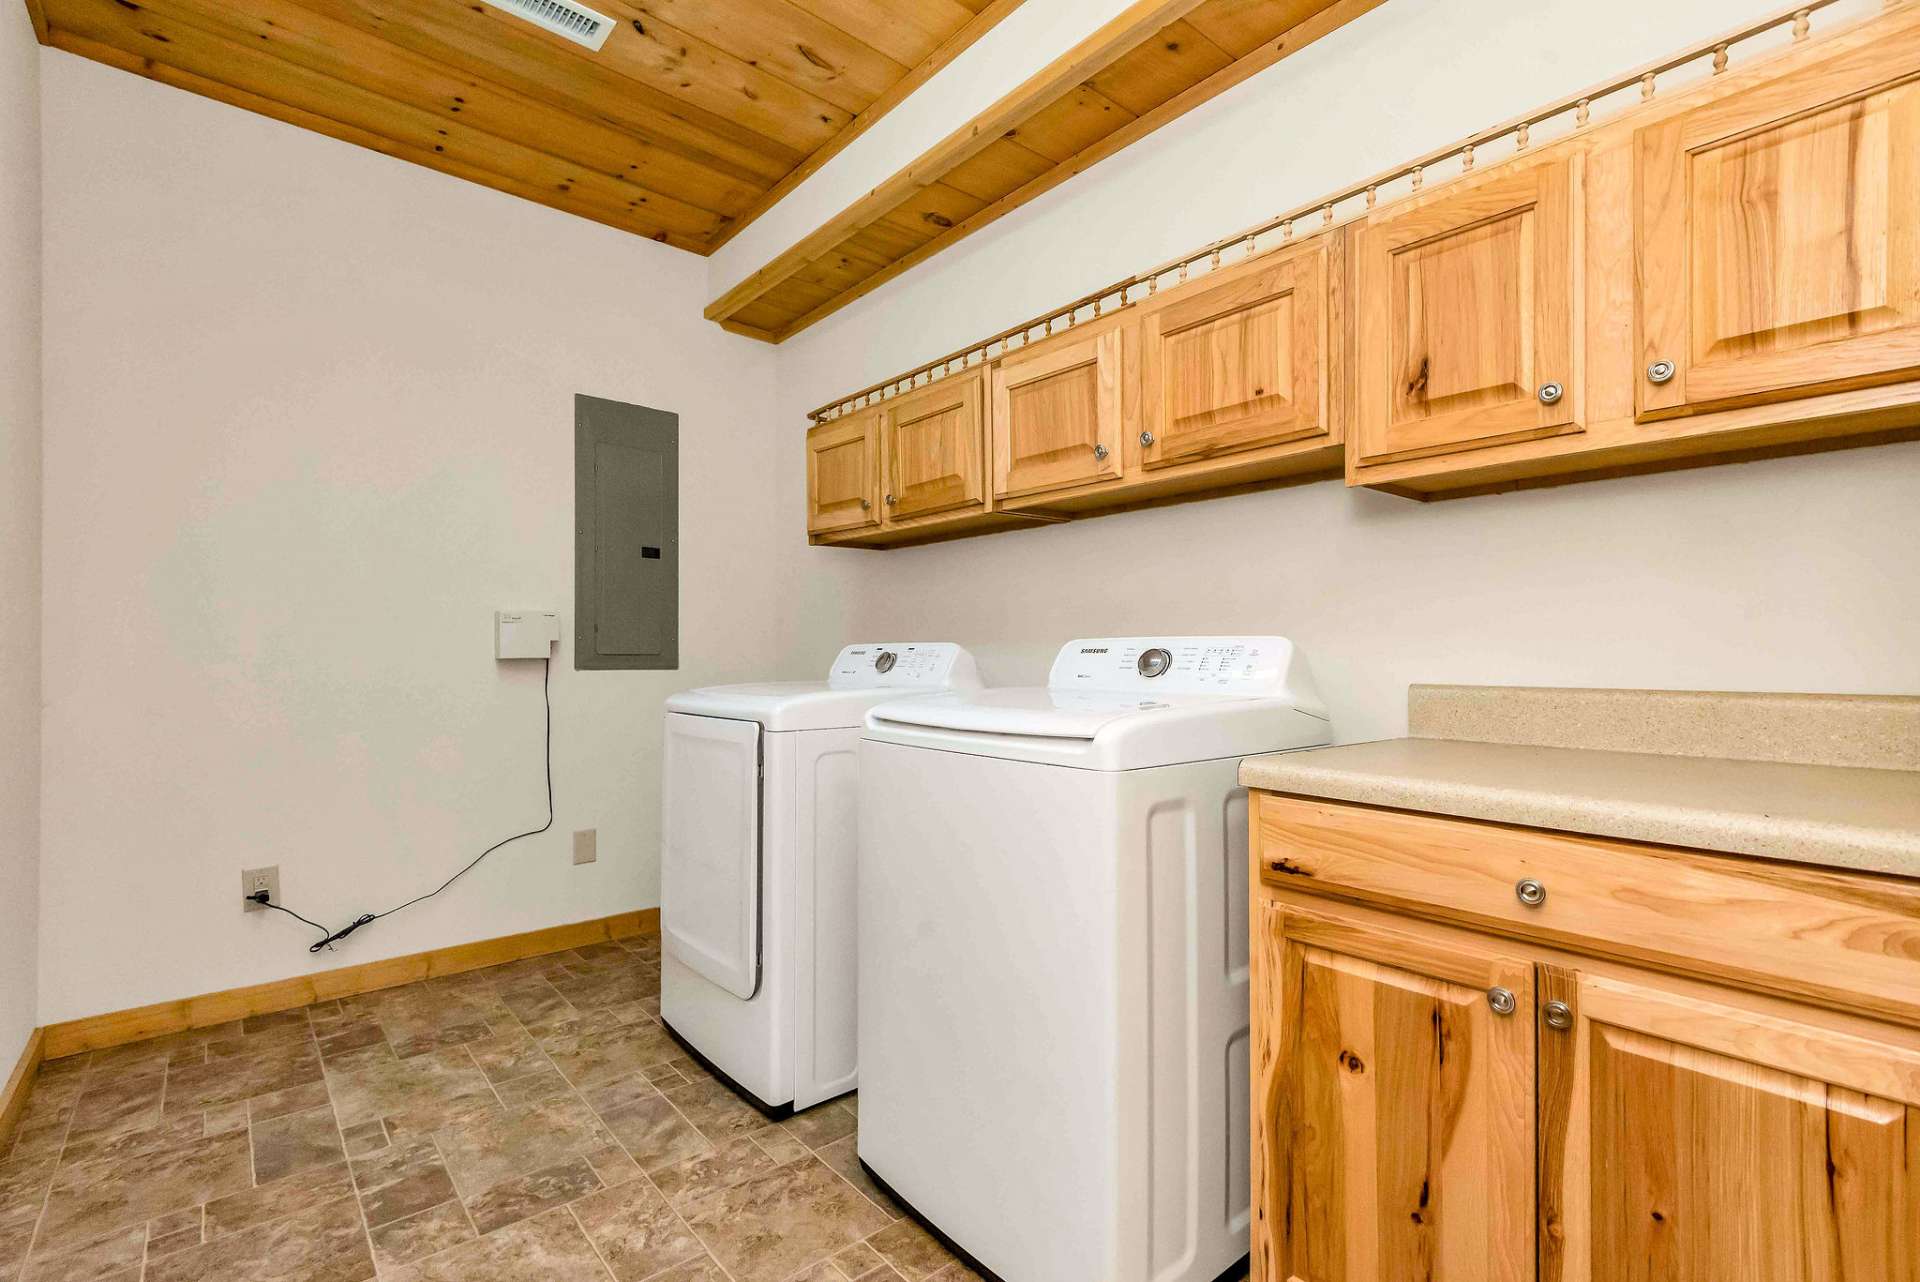 Laundry room with folding area and extra storage.